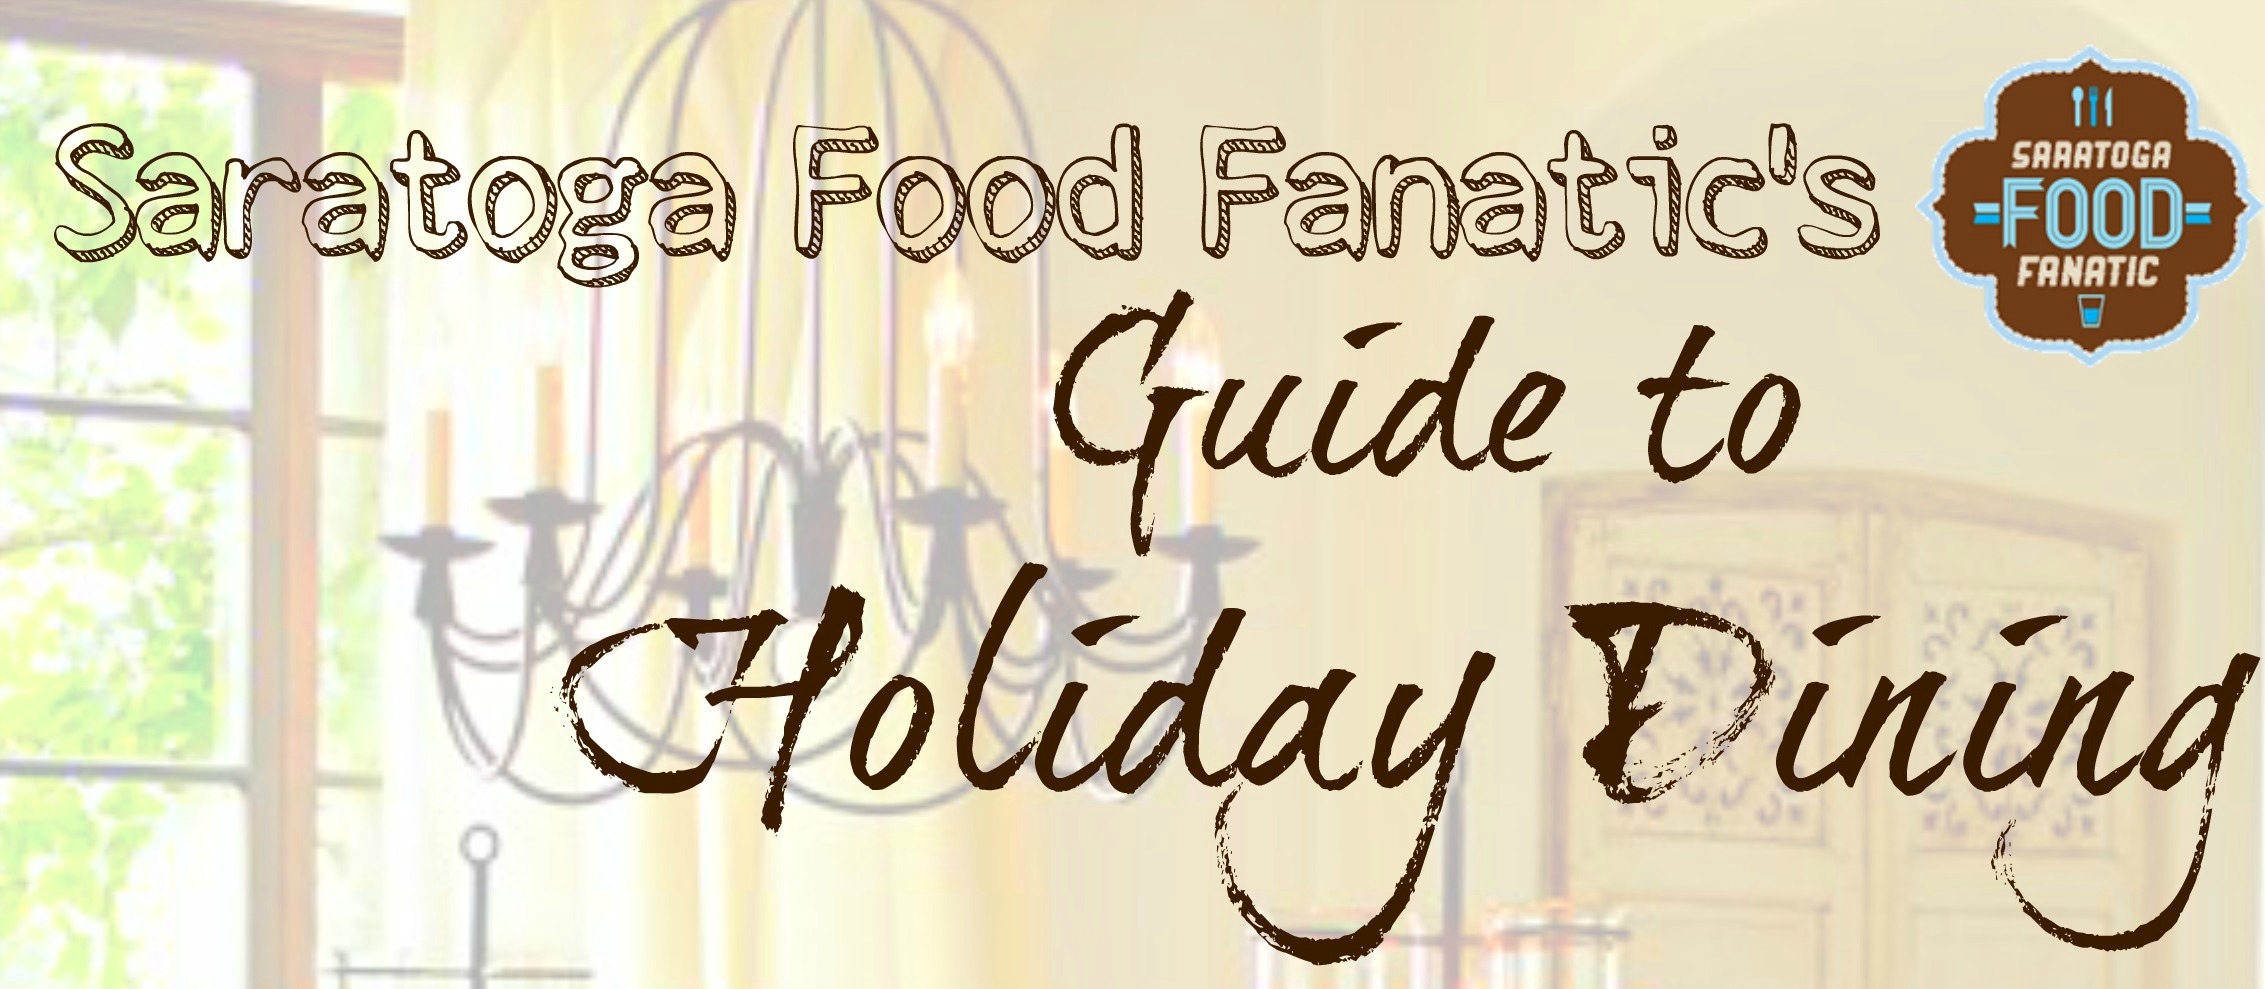 Saratoga Food Fanatic's Guide to Holiday Dining for article